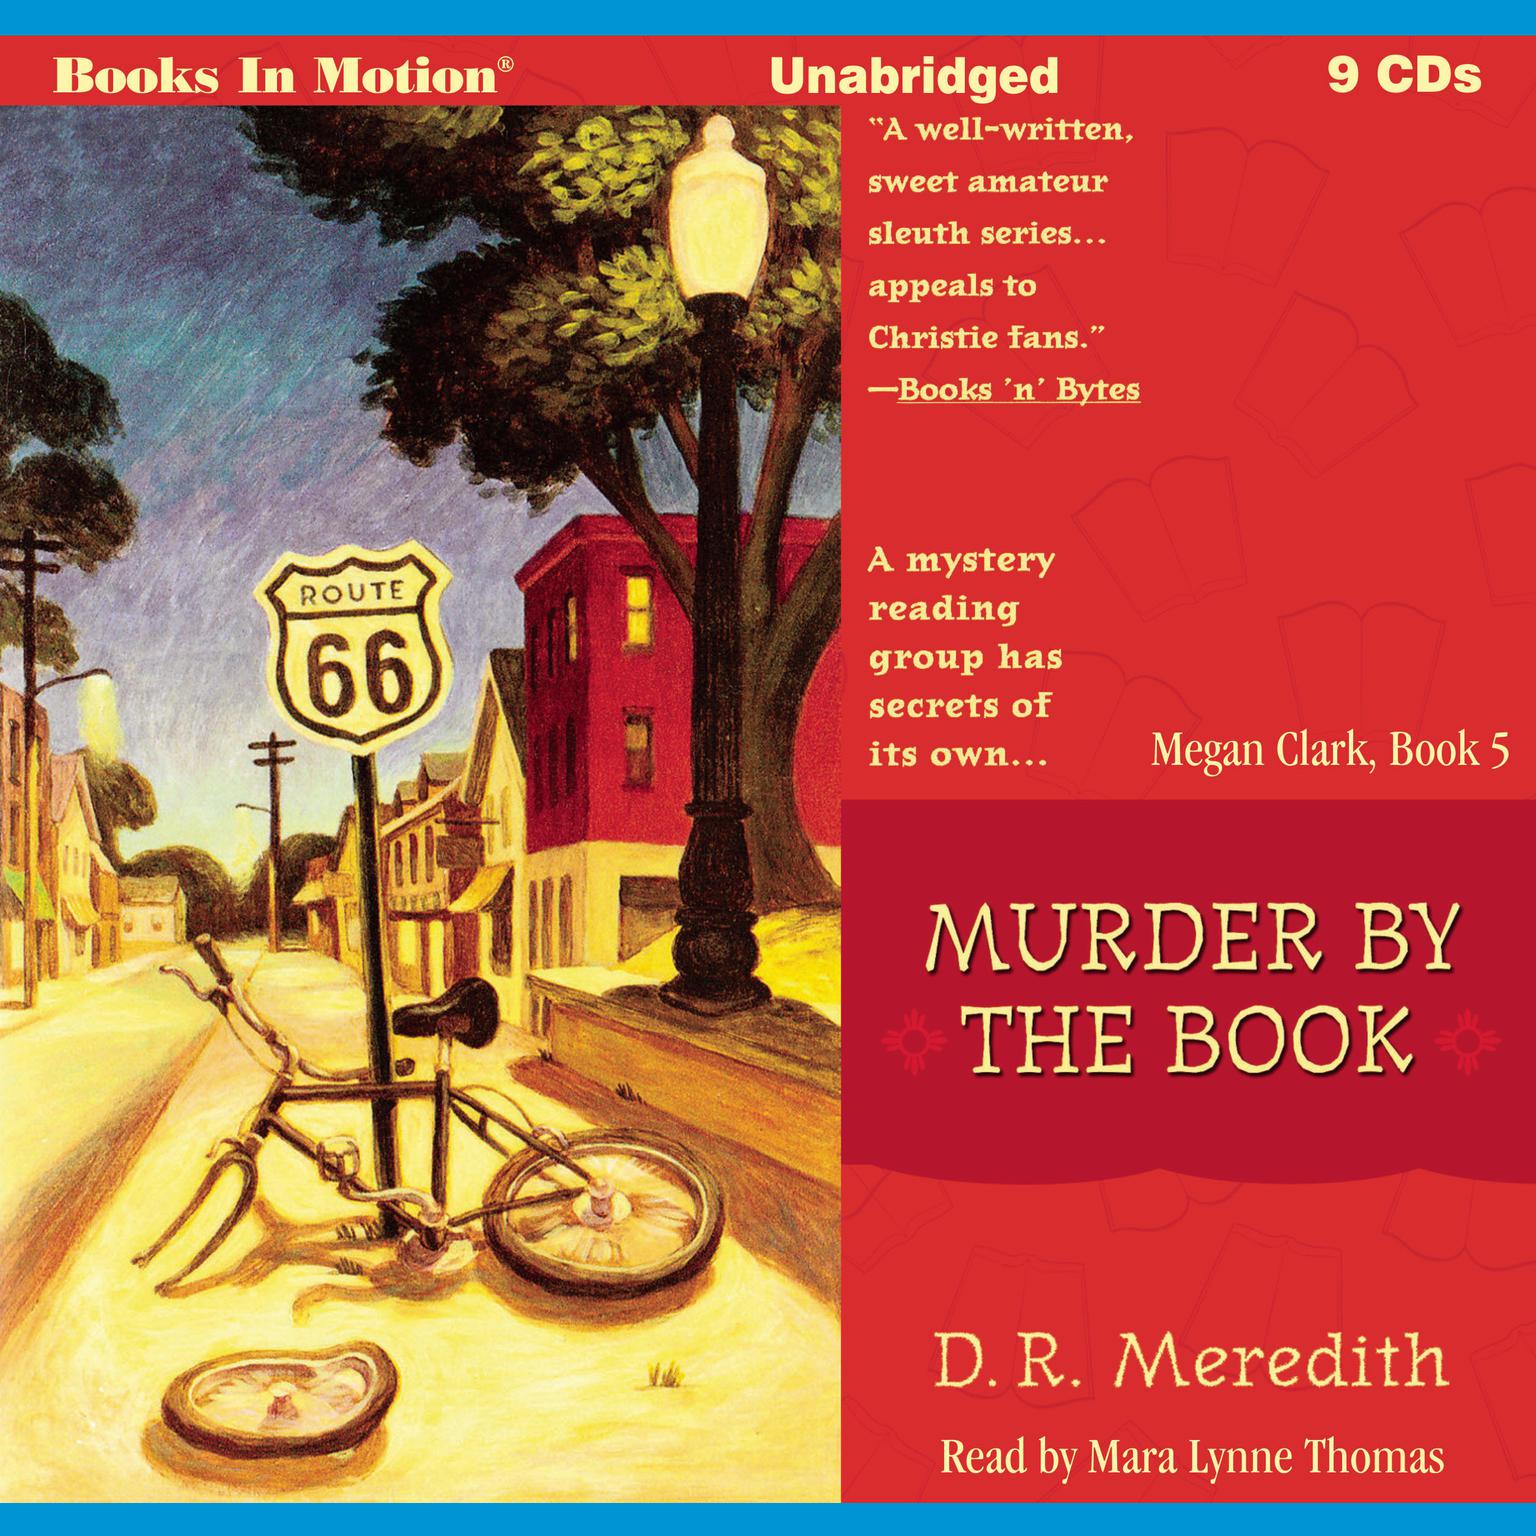 Murder By The Book Audiobook, by D.R. Meredith